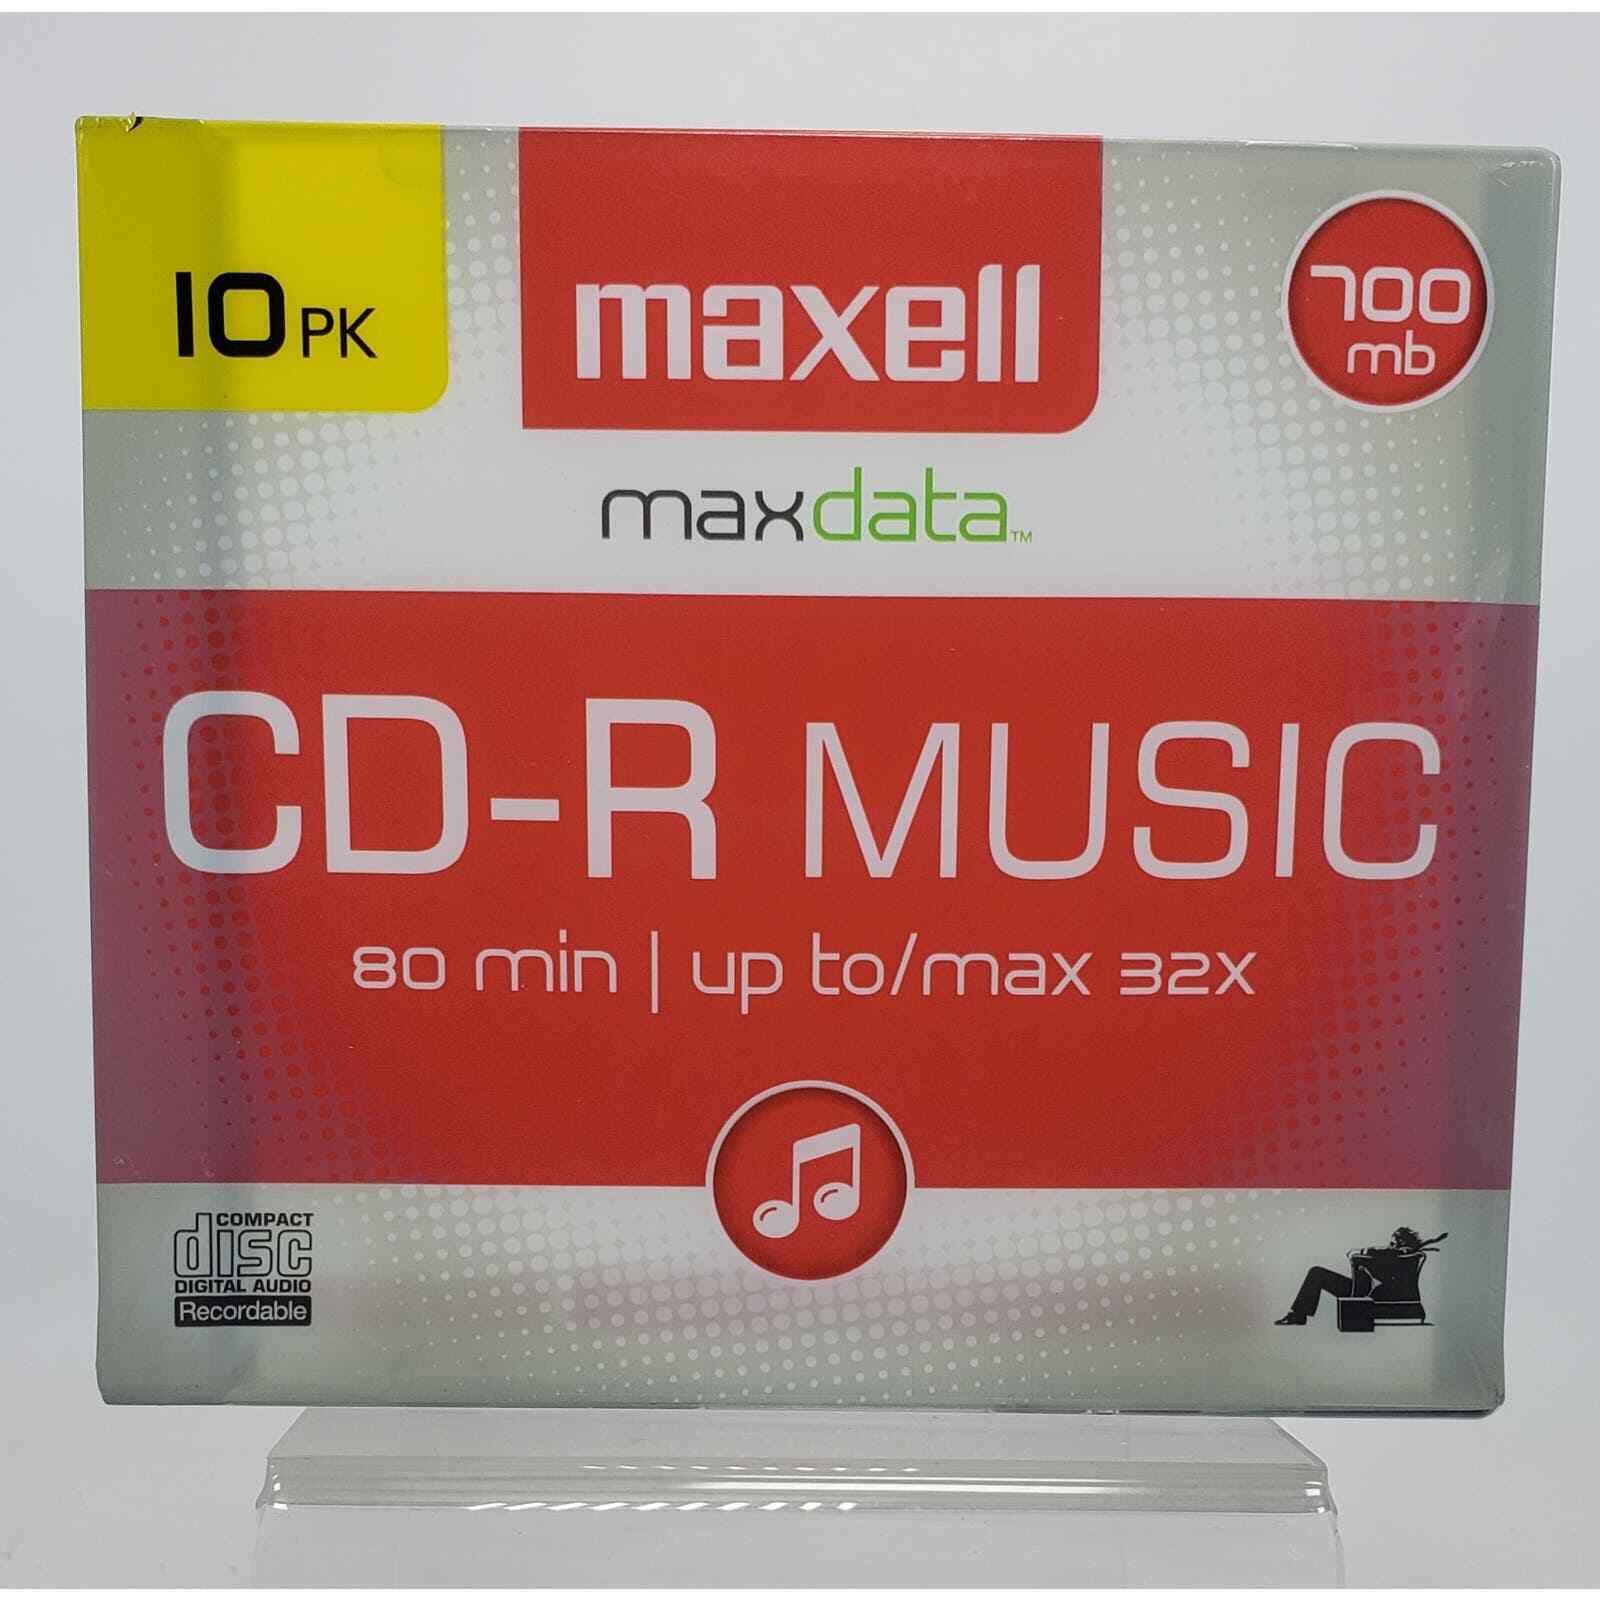 Maxell 10PK CD-R Music For Audio Recording 32x 80 Min 700 MB Compact Disc